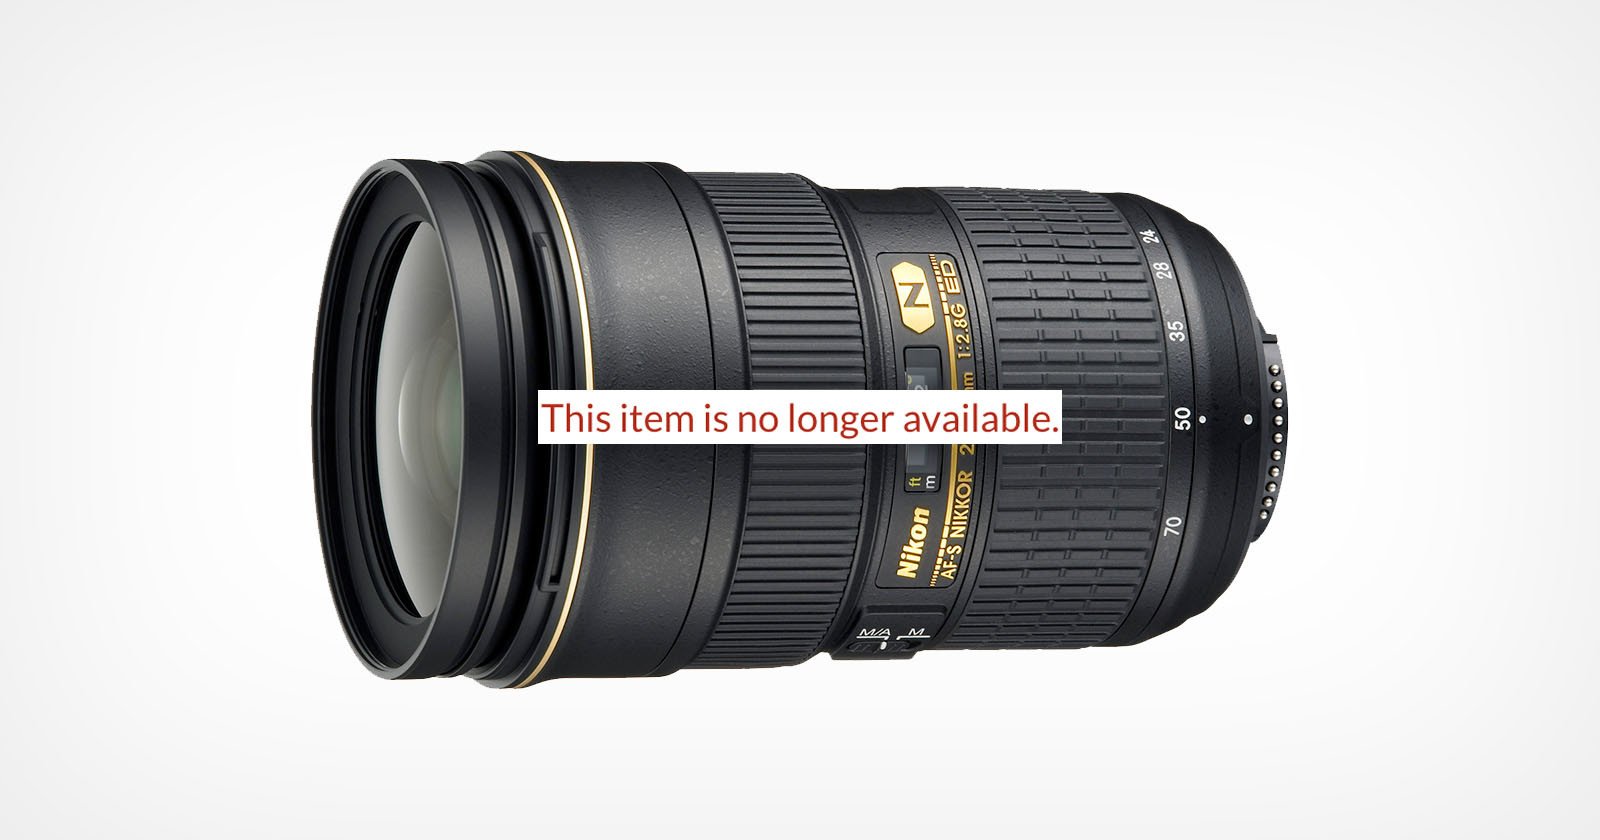 Nikon Has Discontinued 35 DSLR Lenses Over the Past 3 Years: Report